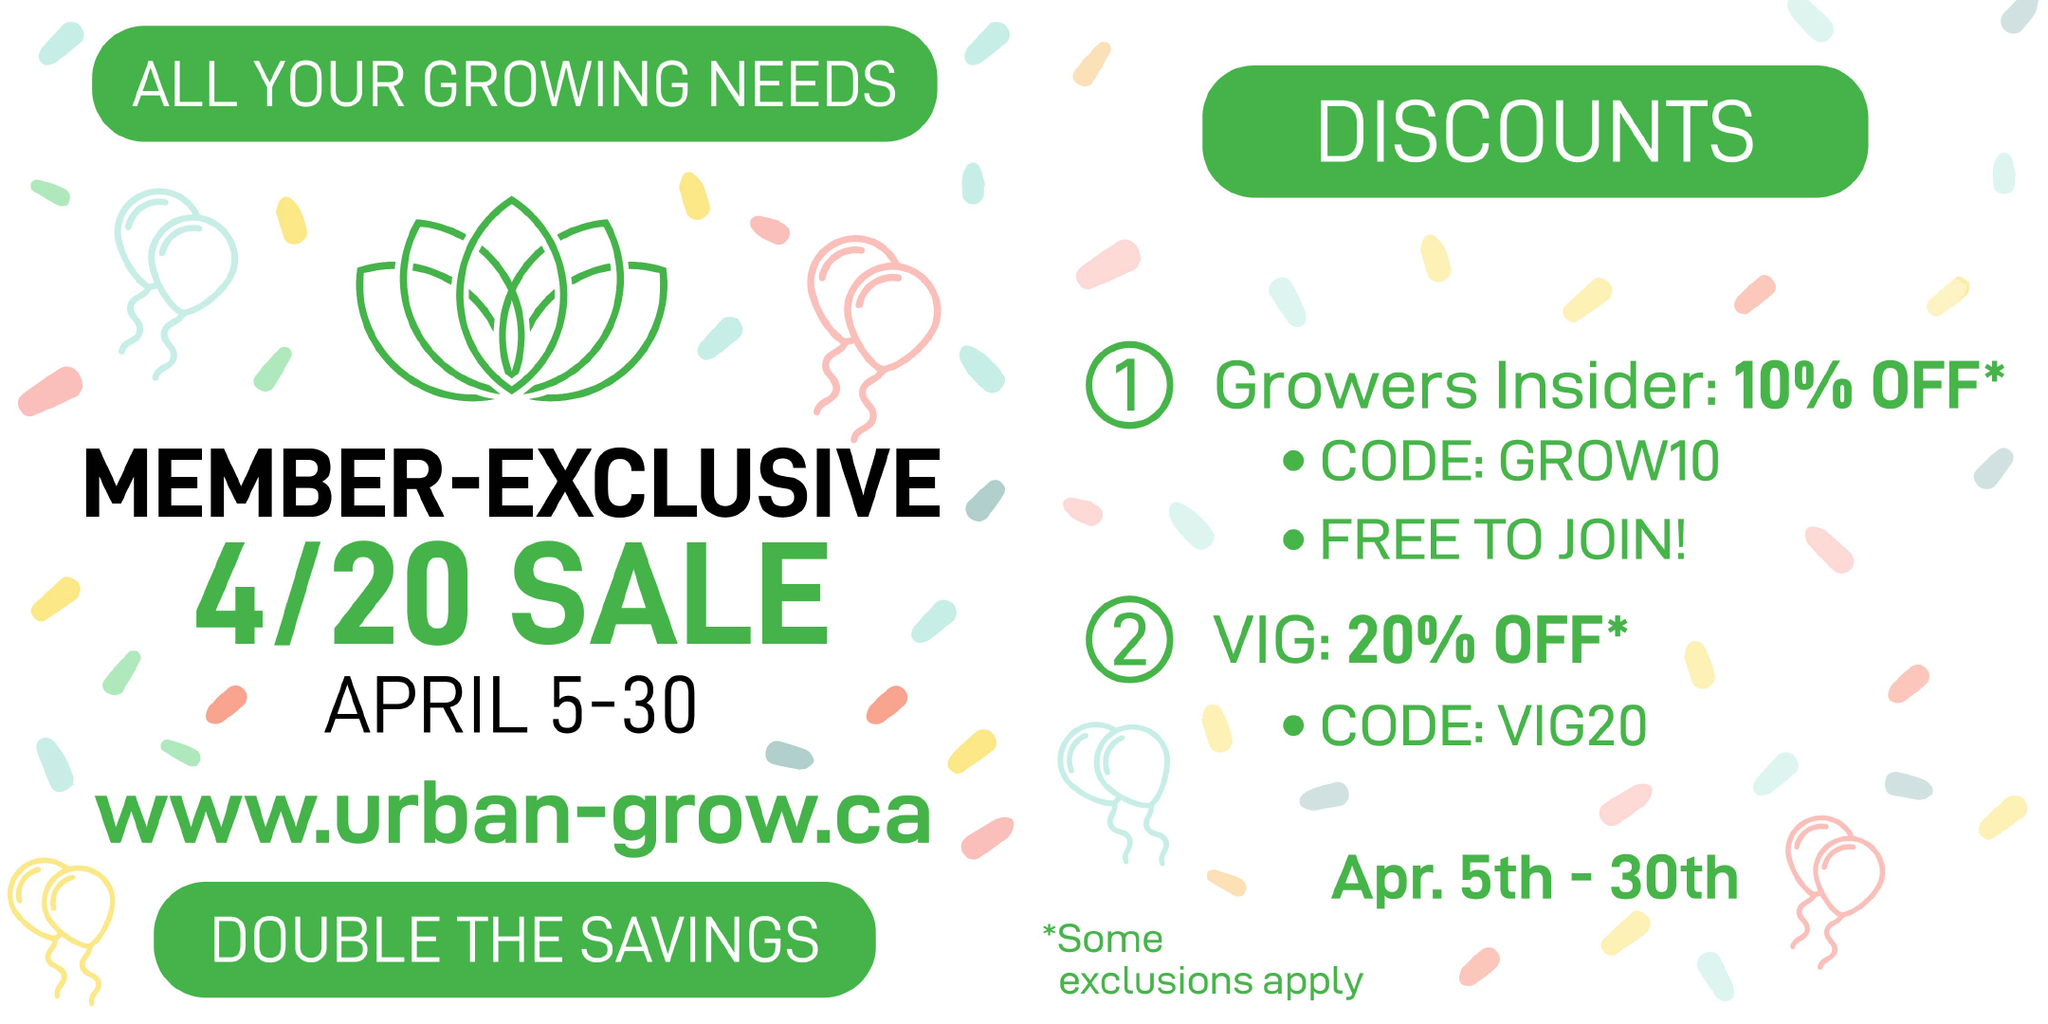 Urban Grow Garden Supply's member-exclusive April sale. Enjoy double the discounts on all eligible products.